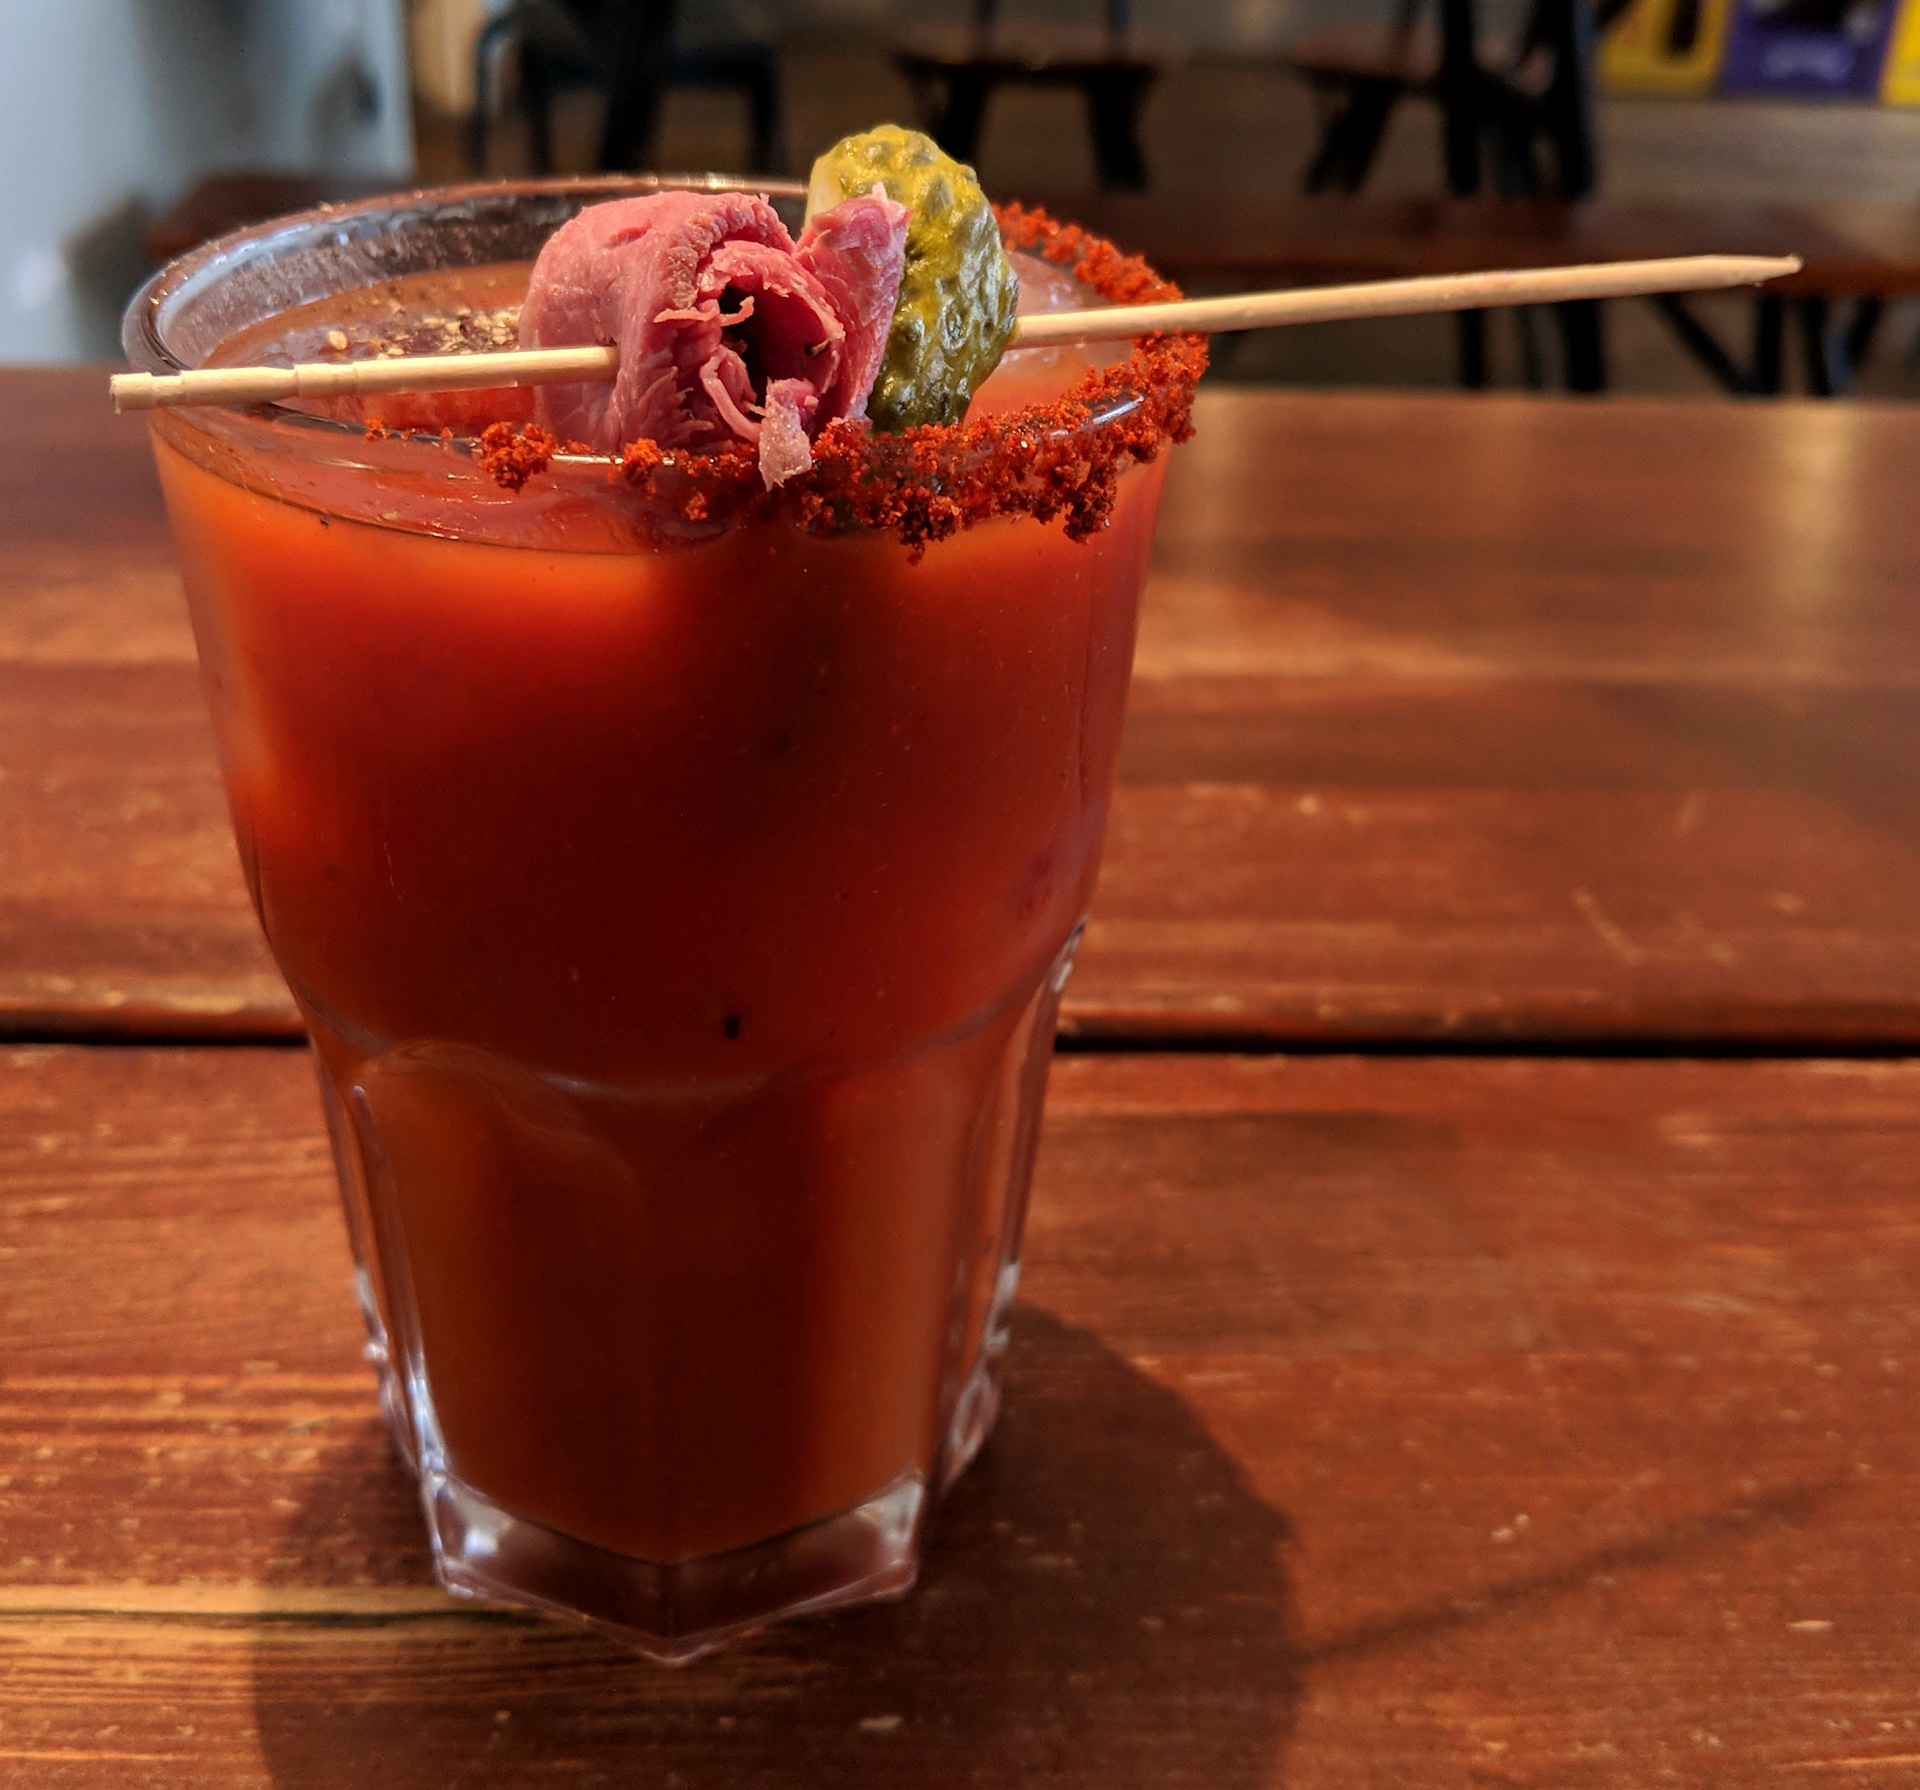 The Bloody Mary (with a little slice of pastrami and pickle)